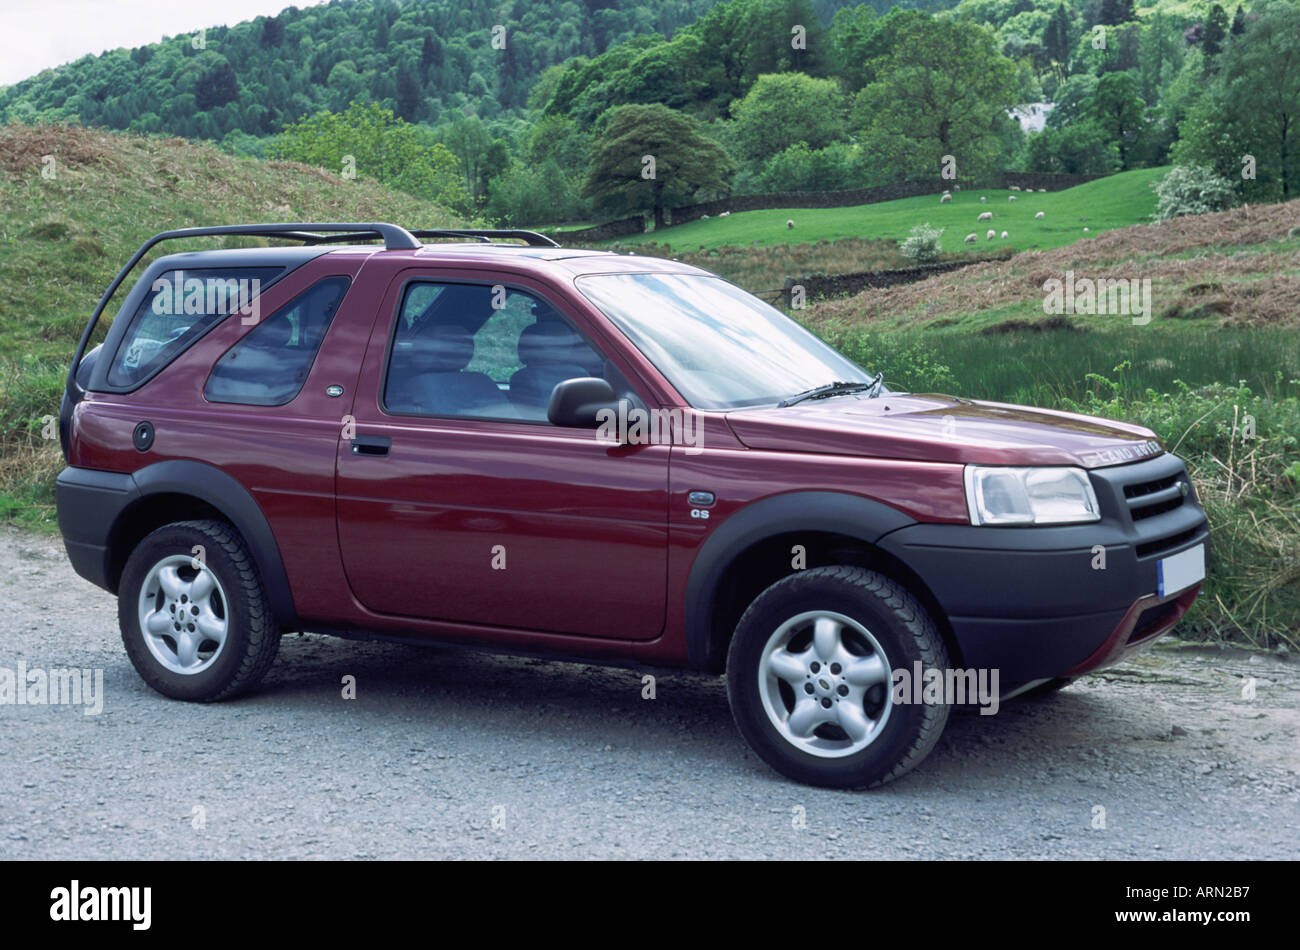 Red Maroon Landrover Freelander car viewed against a background of gently rolling fields with sheep and wooded area Stock Photo